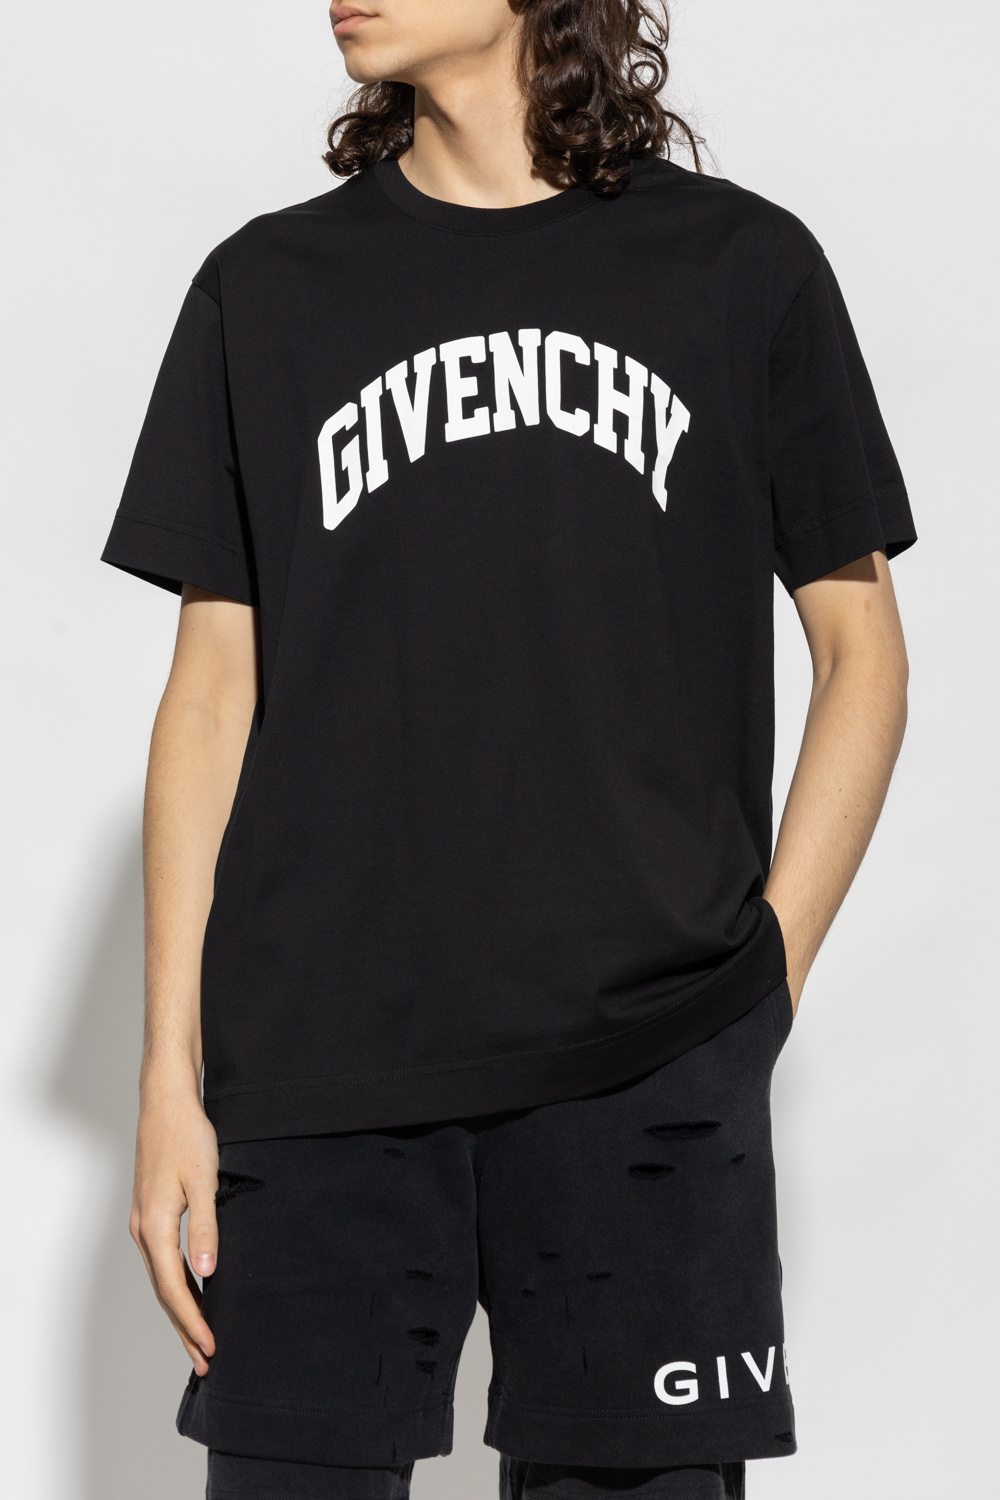 Givenchy Another reveal over at Givenchy on the